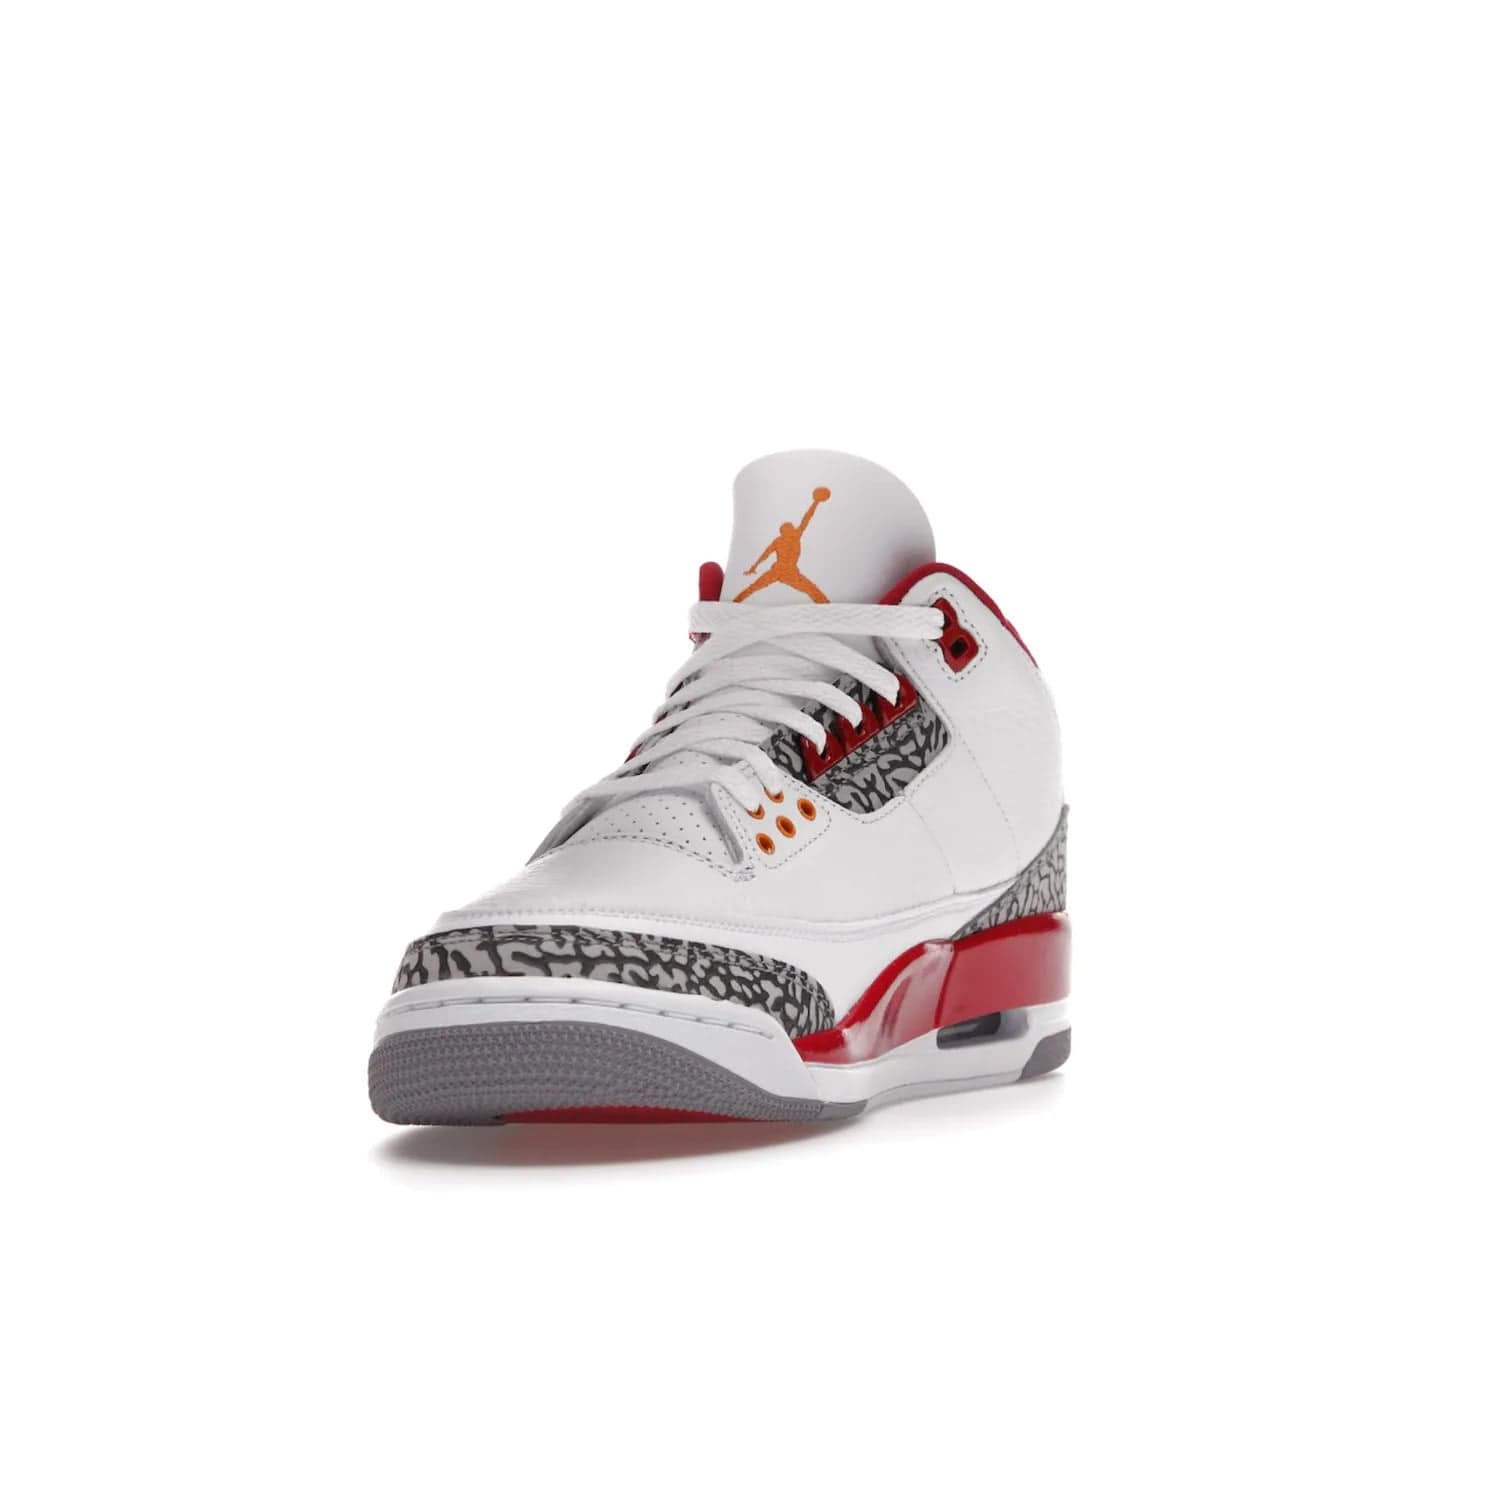 Jordan 3 Retro Cardinal Red - Image 13 - Only at www.BallersClubKickz.com - Air Jordan 3 Retro Cardinal Red combines classic style and modern appeal - white tumbled leather, signature Elephant Print overlays, cardinal red midsoles, Jumpman logo embroidery. Available Feb 2022.